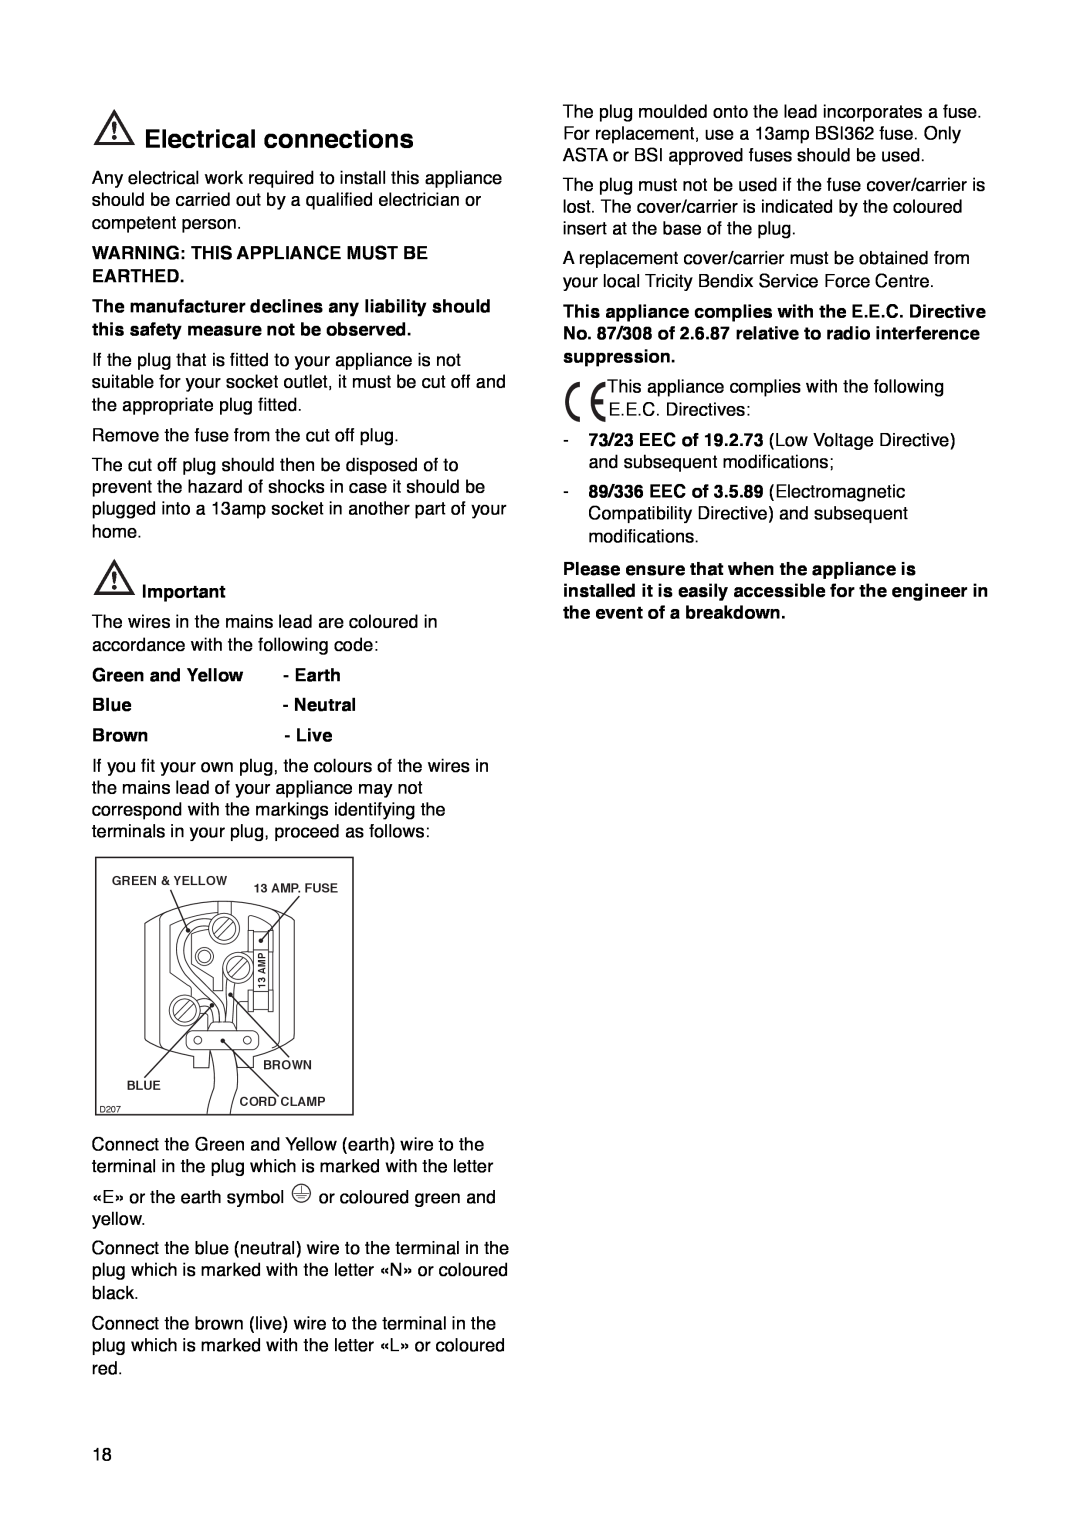 Tricity Bendix FD 852 installation instructions Electrical connections 